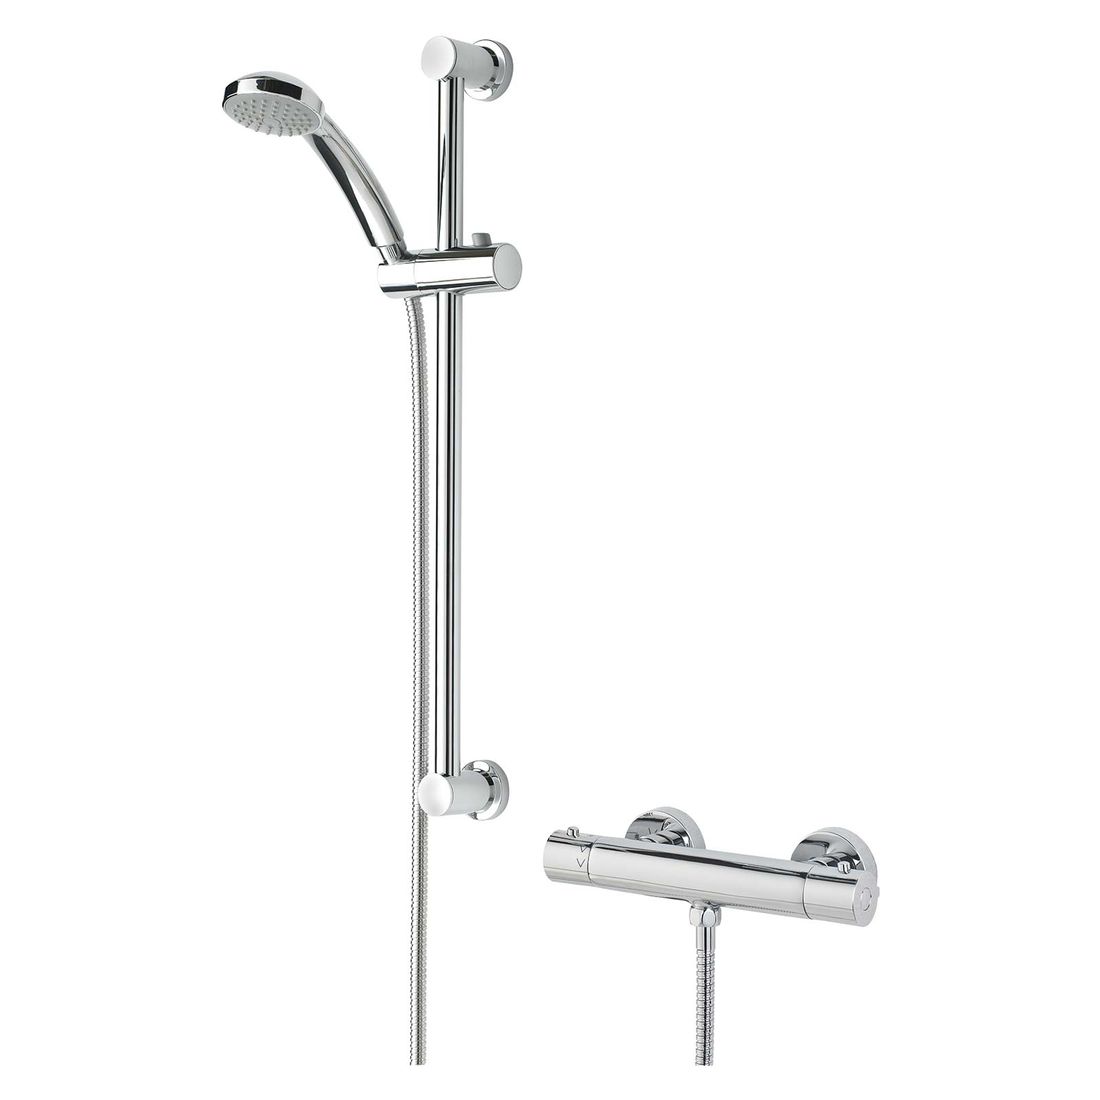 Bristan Frenzy Bar Shower Cool Touch Valve And Kit Chrome